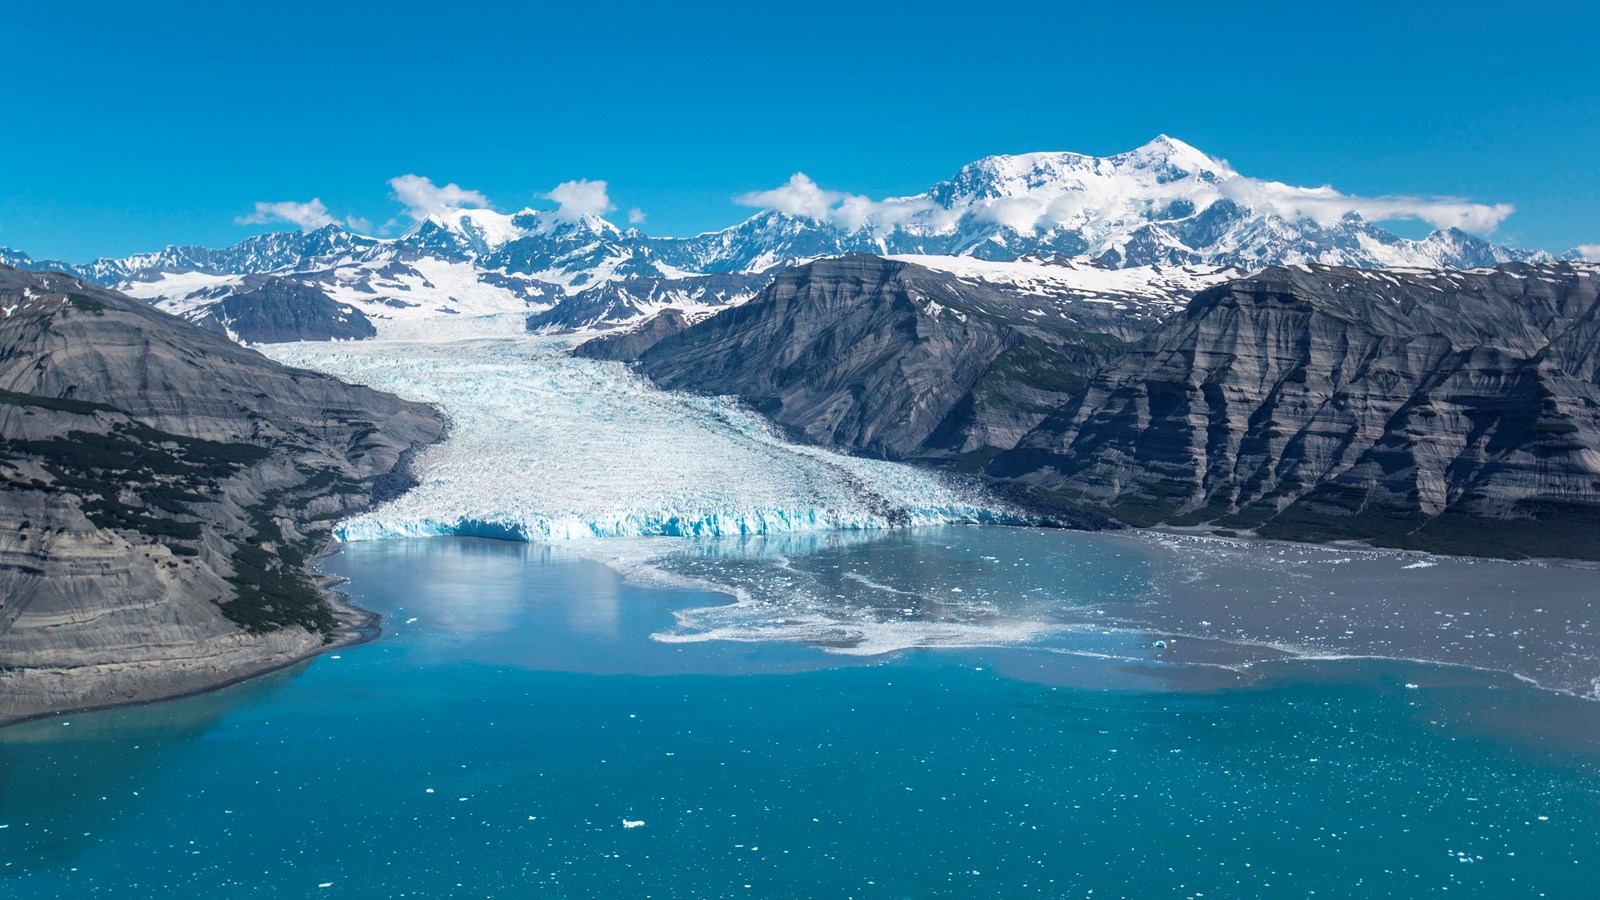 Icy Bay, Tyndall Glacier, and Mount St. Elias